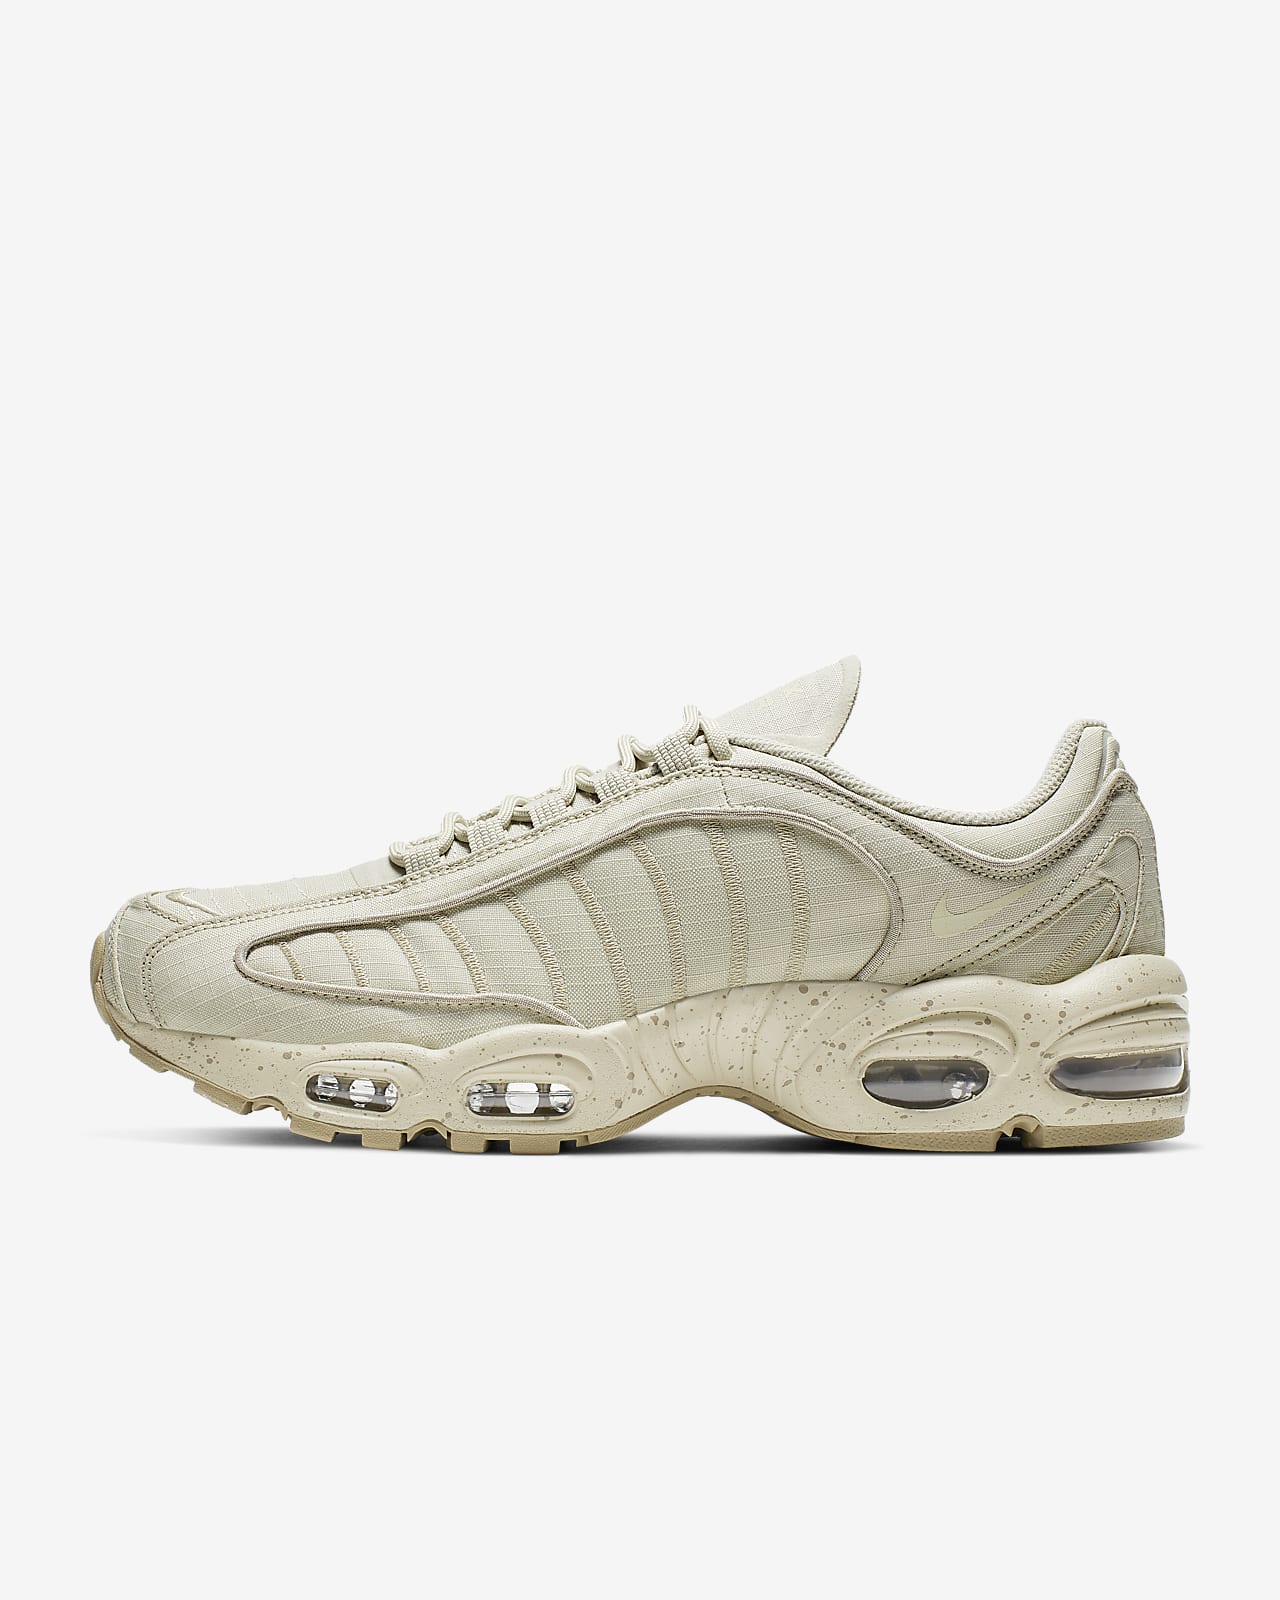 Chaussure Nike Air Max Tailwind IV SP pour Homme